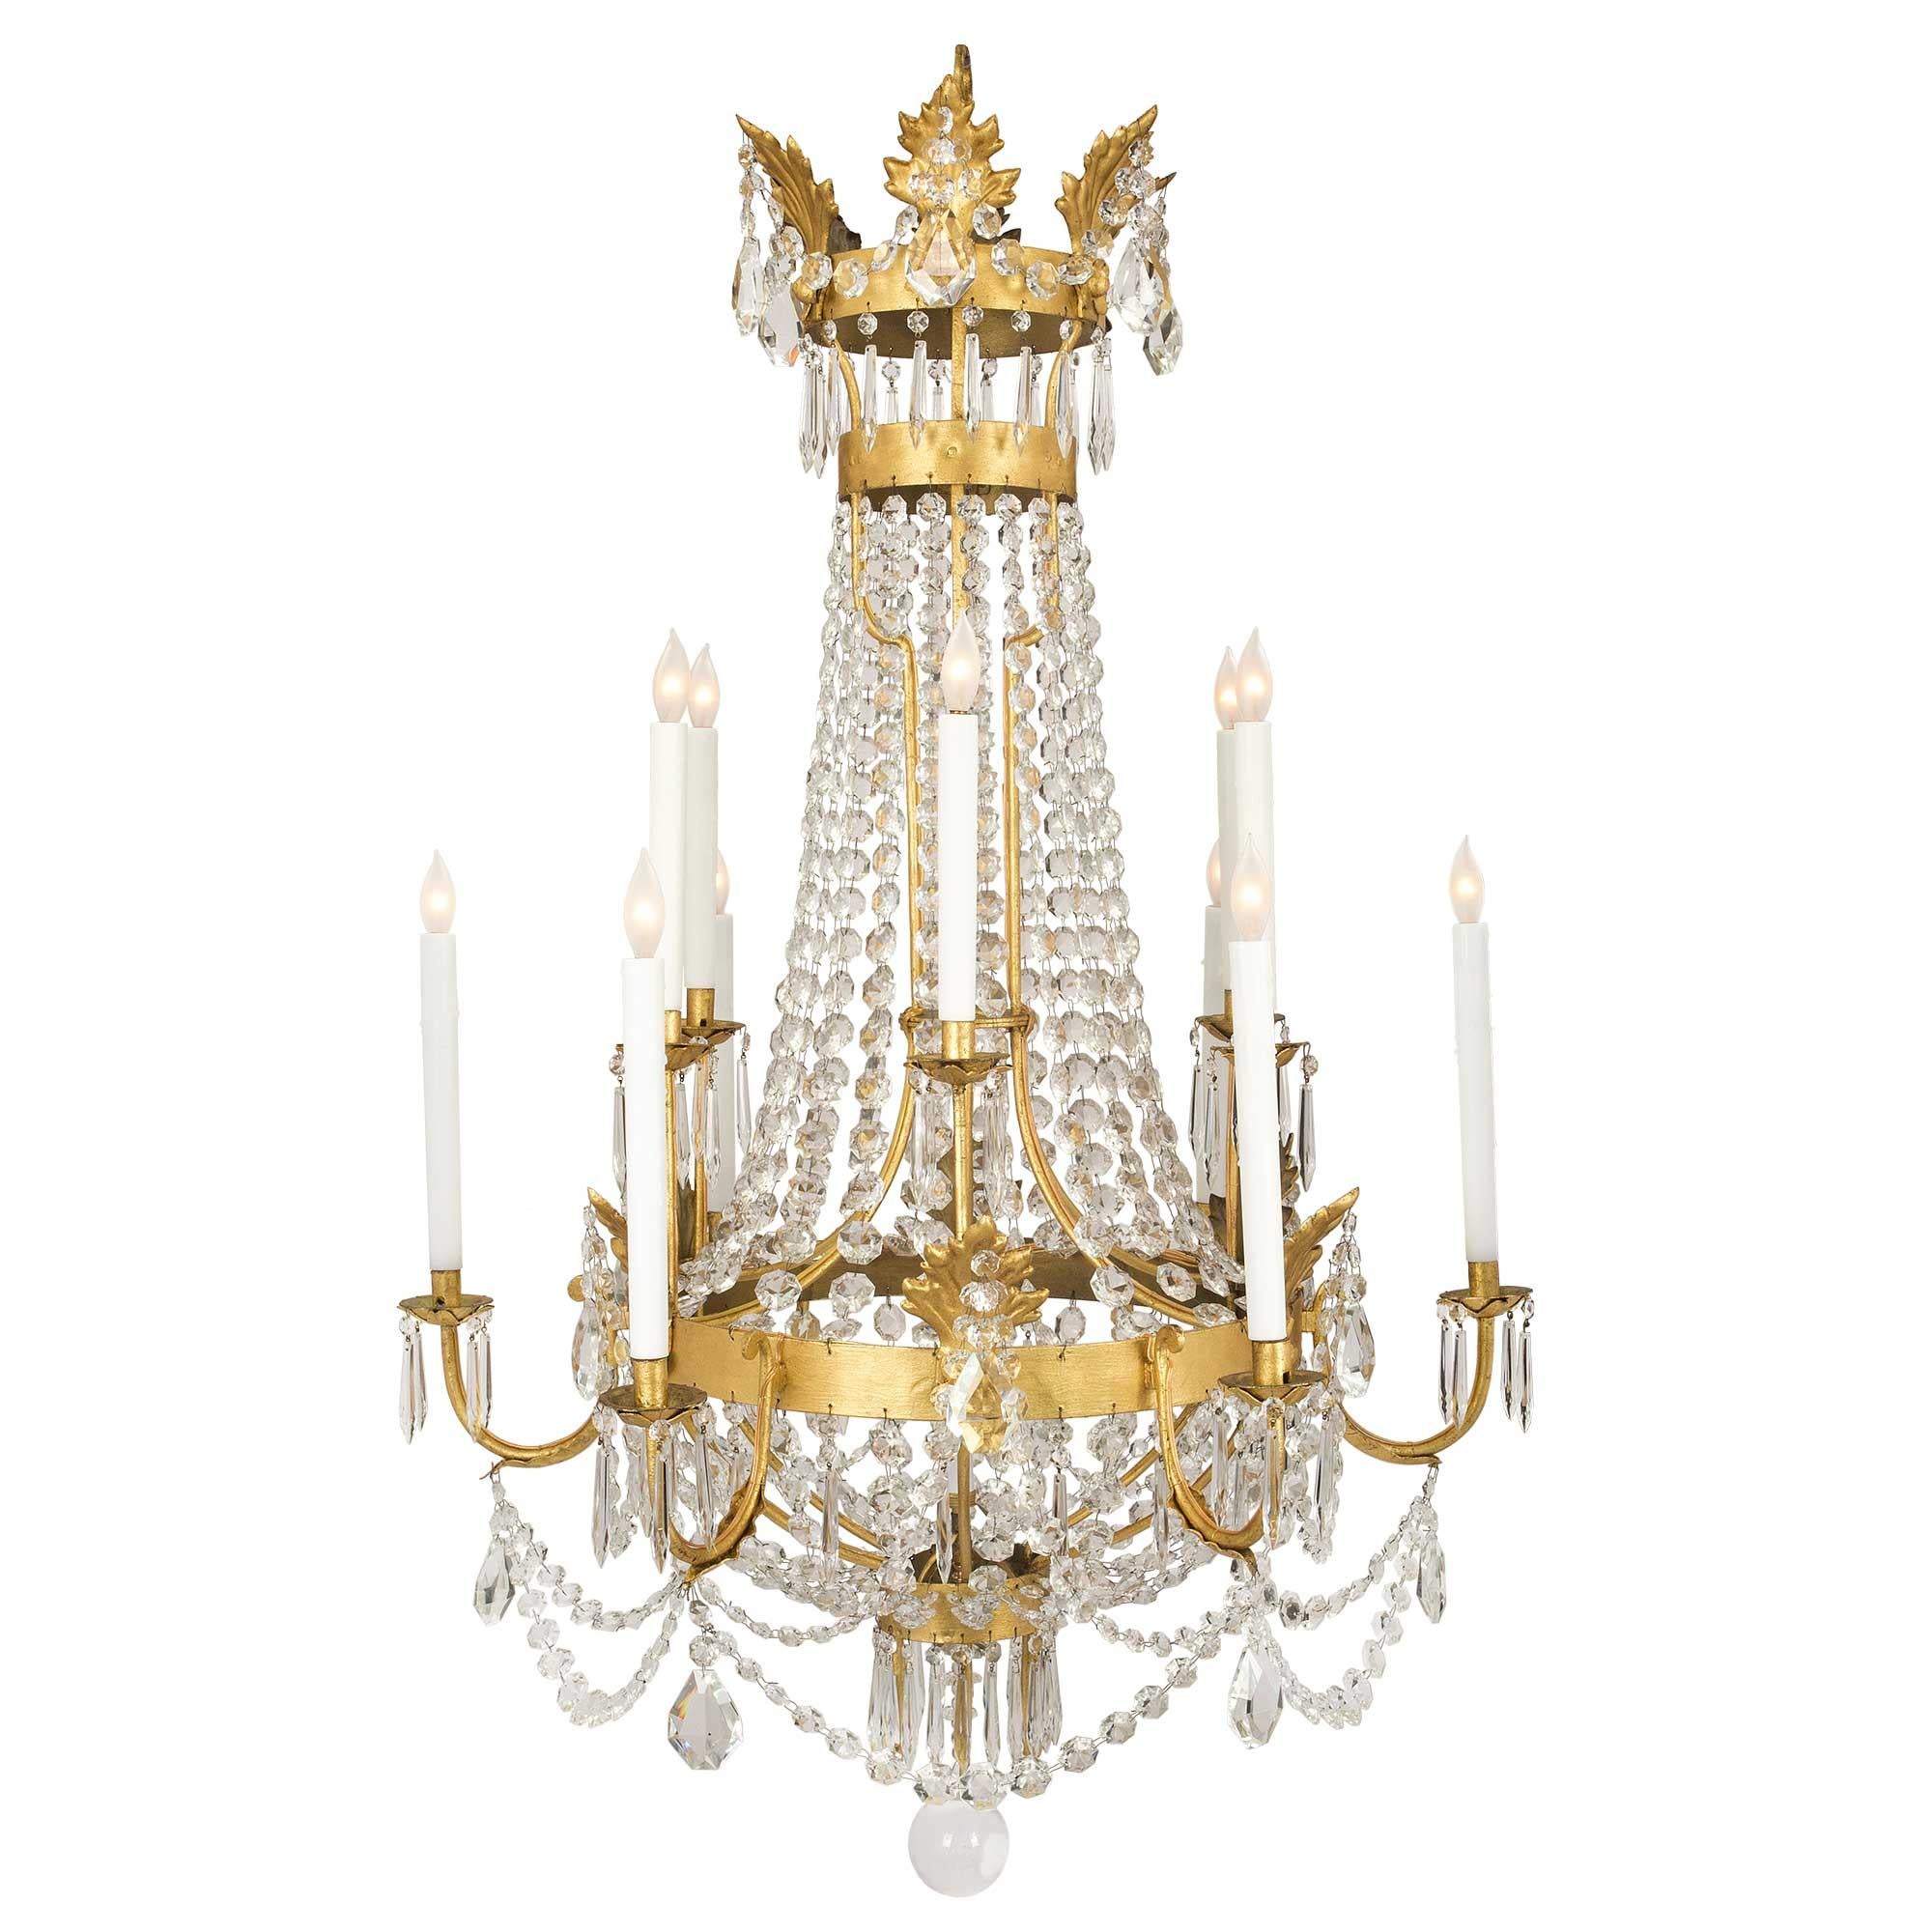 Pair of Italian 19th Century Baccarat Crystal and Gilt Iron Chandeliers In Good Condition For Sale In West Palm Beach, FL